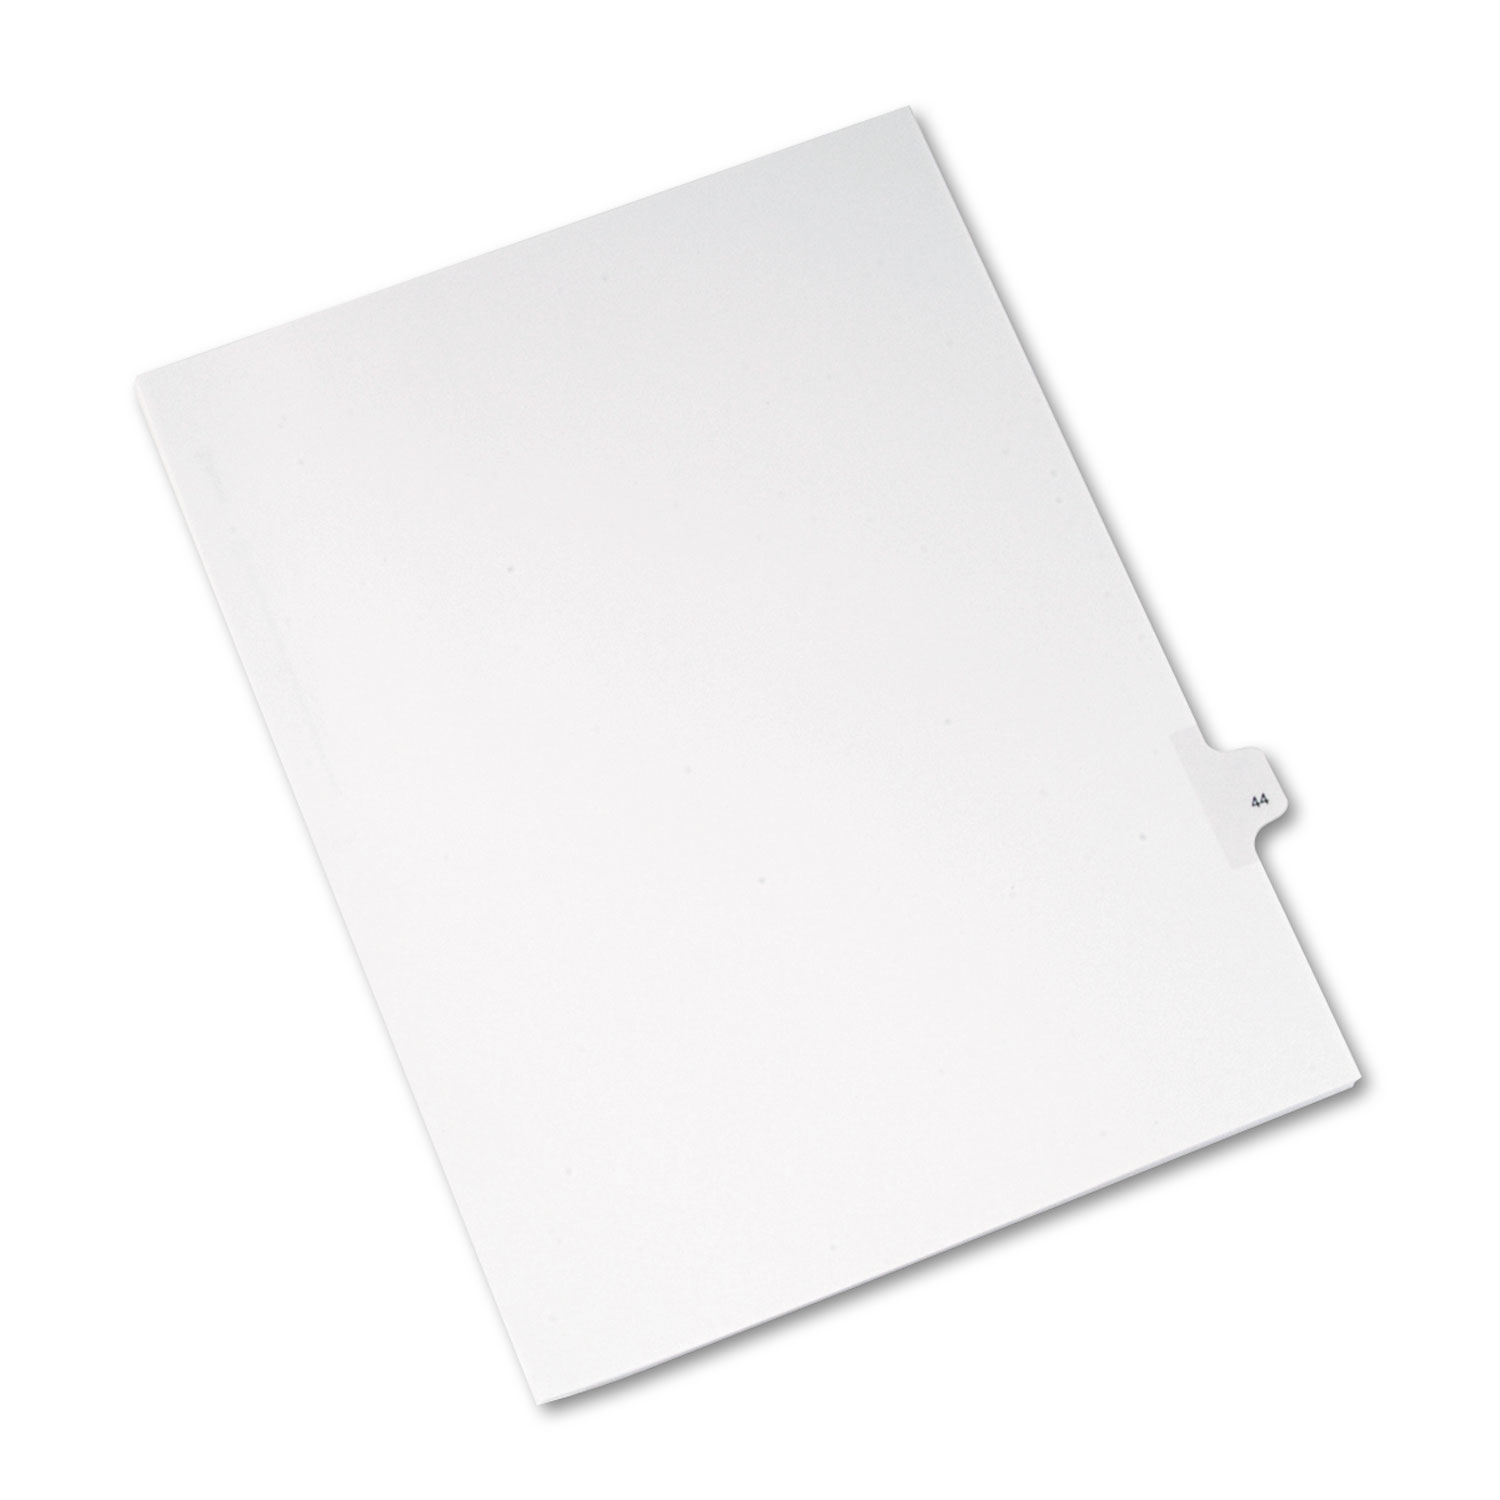 Allstate-Style Legal Exhibit Side Tab Divider, Title: 44, Letter, White, 25/Pack